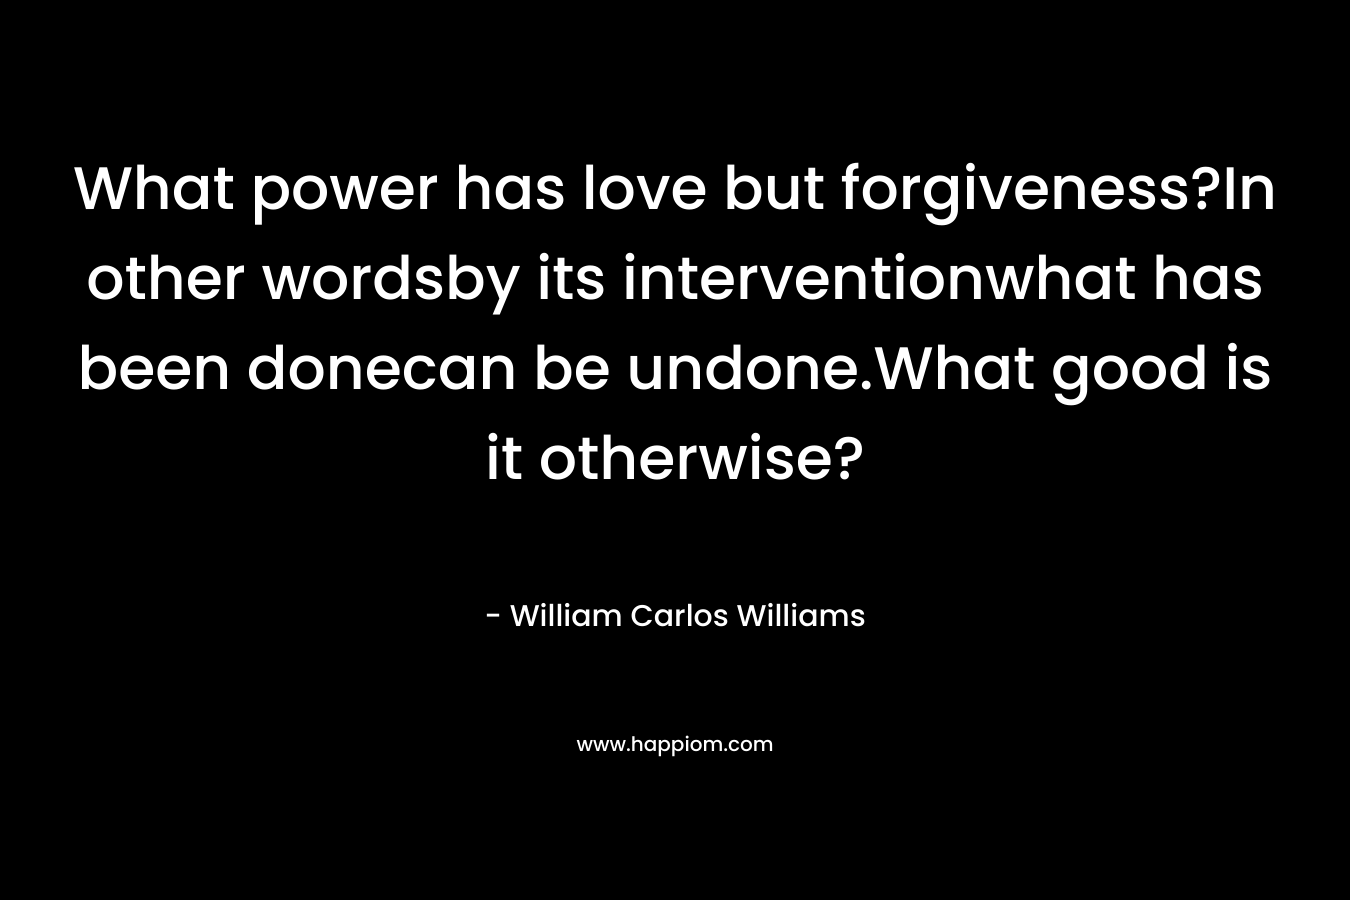 What power has love but forgiveness?In other wordsby its interventionwhat has been donecan be undone.What good is it otherwise? – William Carlos Williams